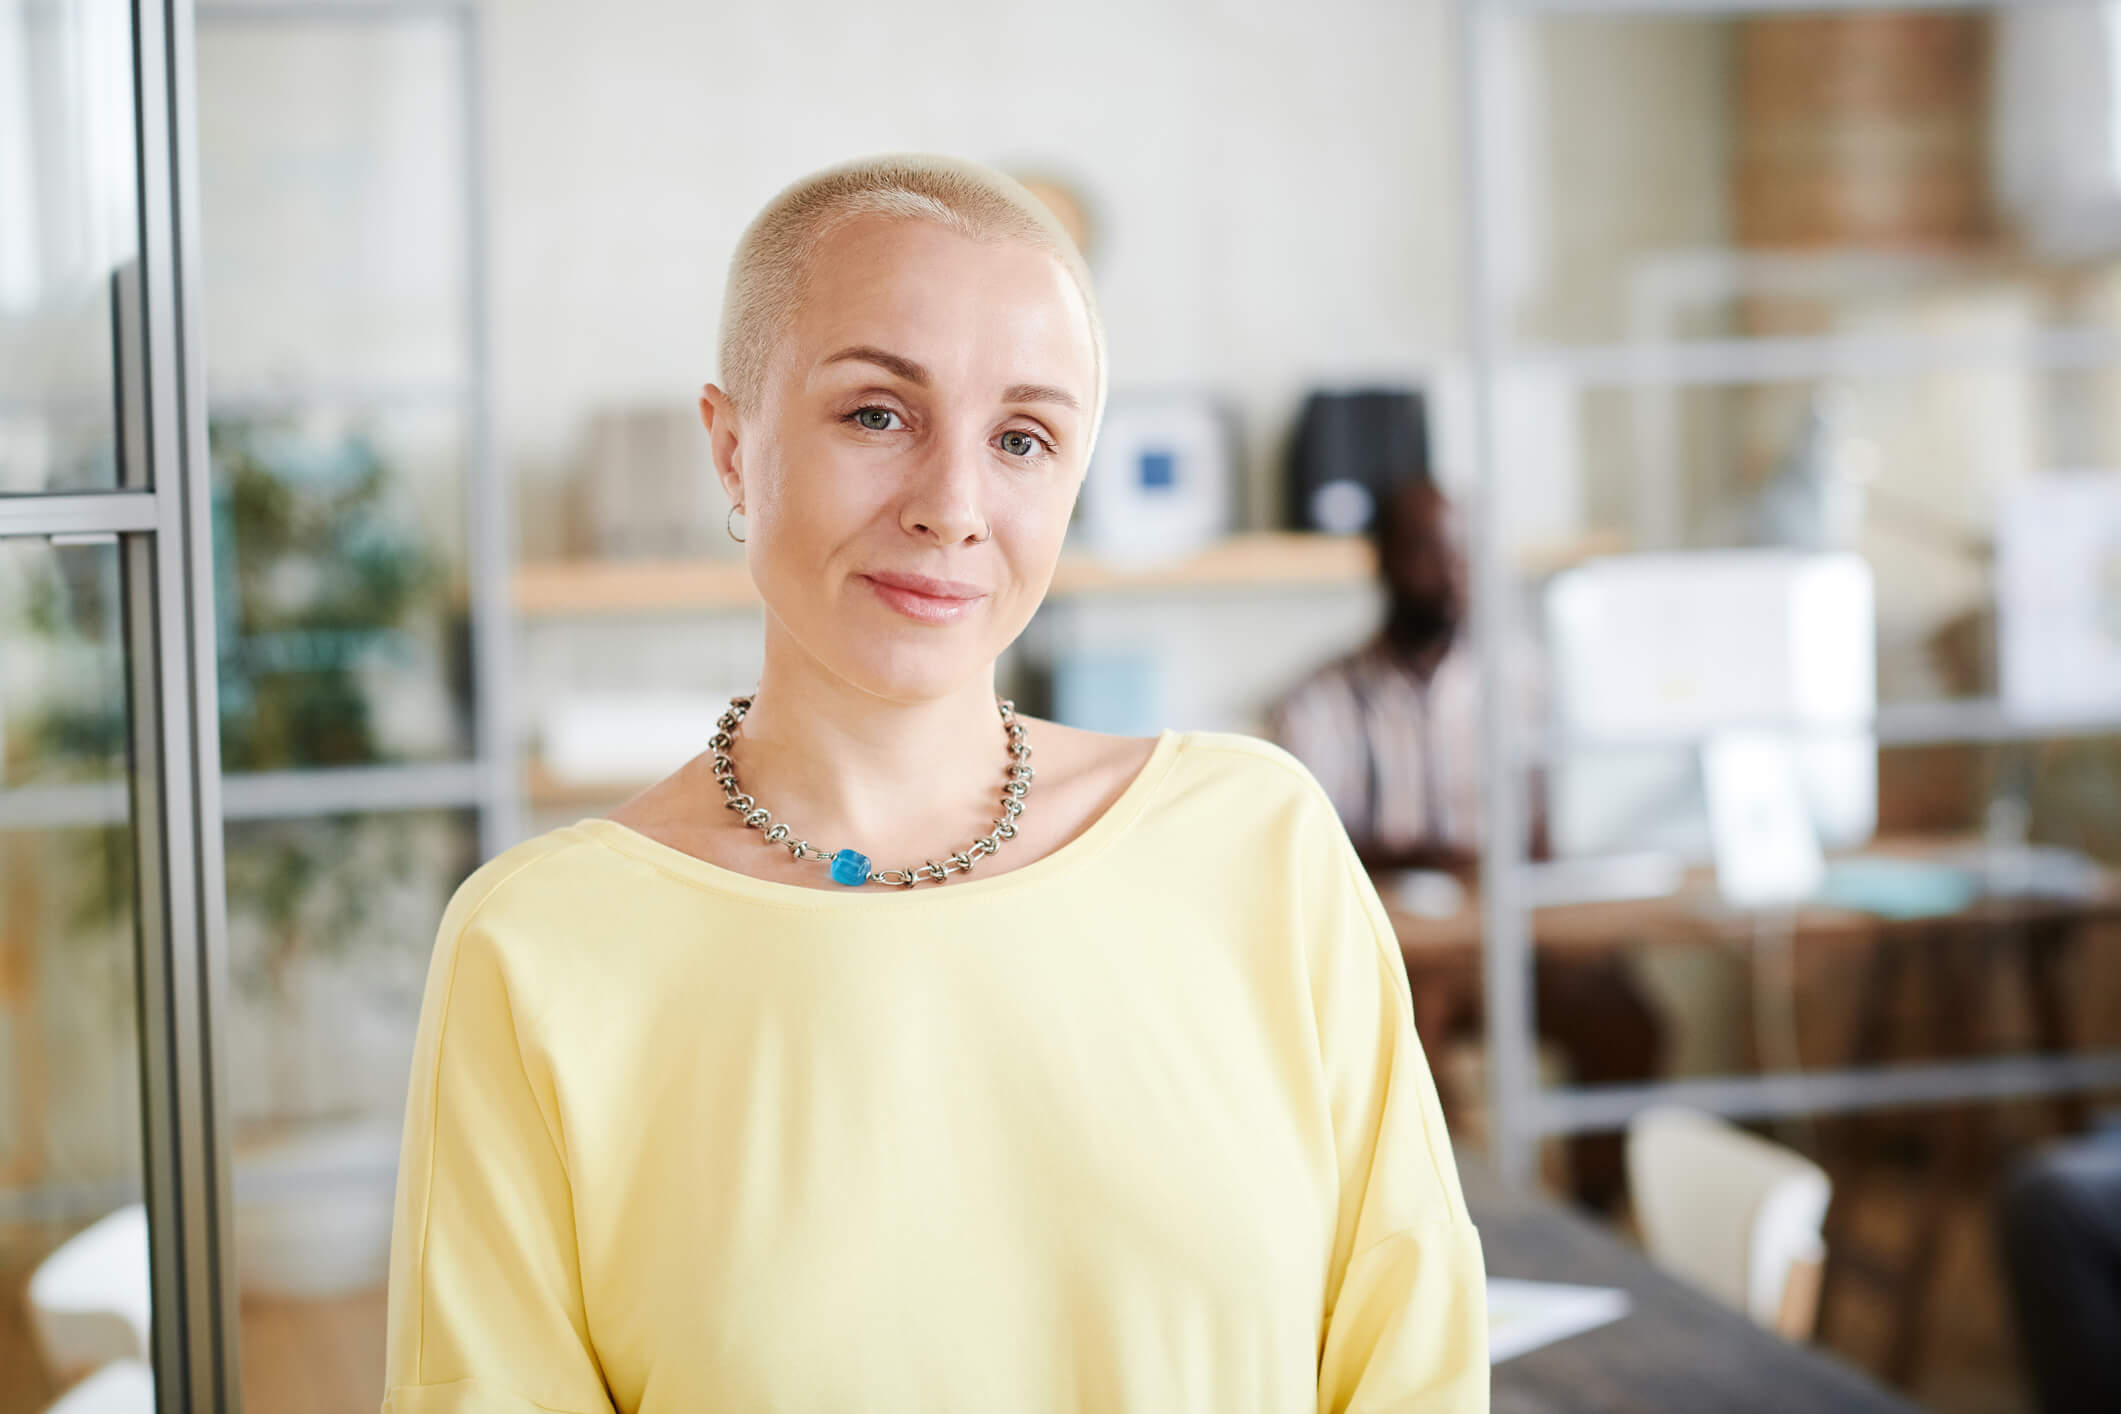 A person with short blonde hair, necklace, and yellow top smiles gently at the camera in a brightly lit office space.